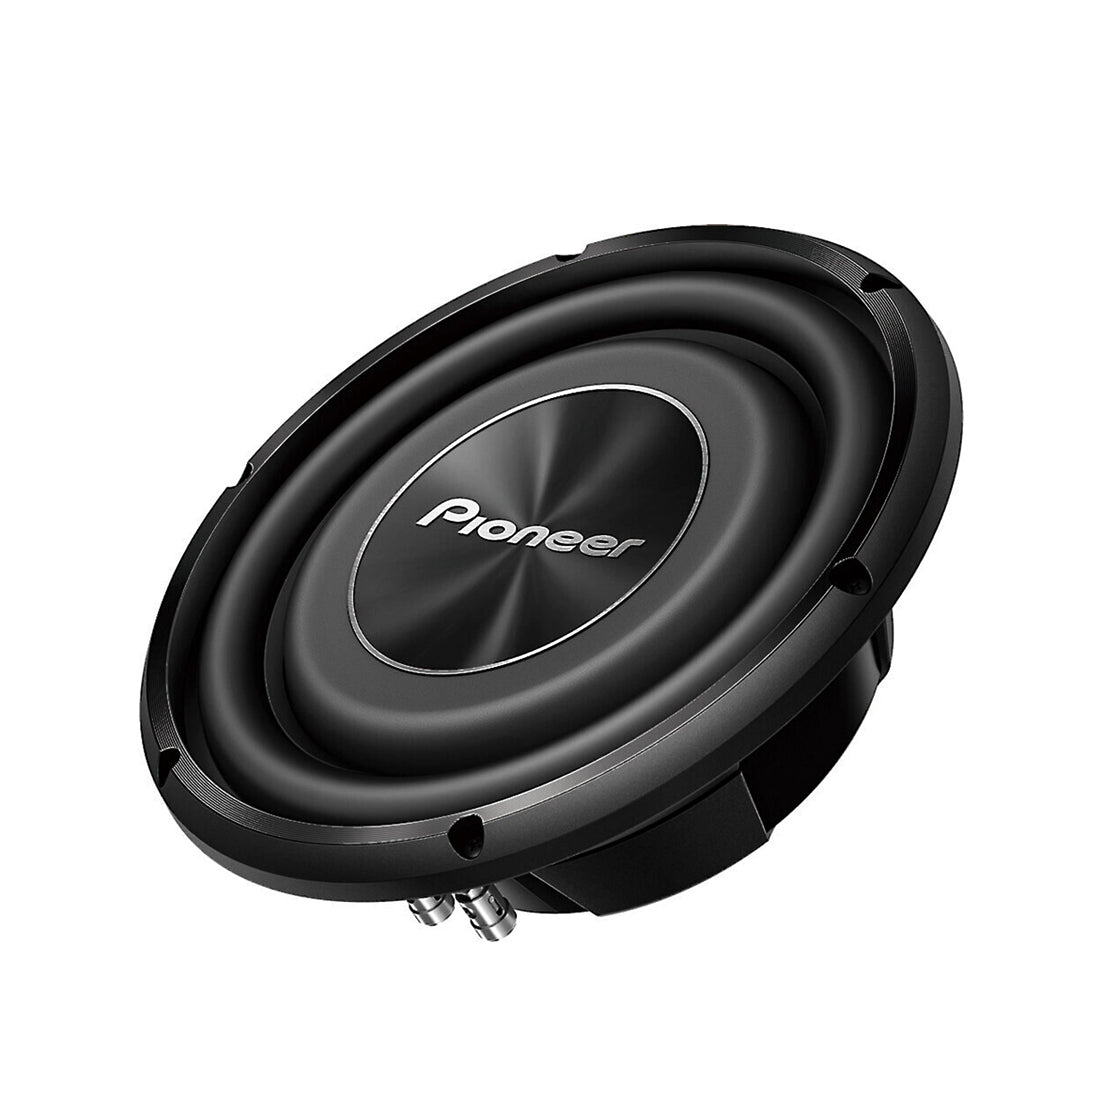 Pioneer TS-A2500LS4 1200 W Max 10" Single 4-Ohm SVC Shallow Mount Car Subwoofer